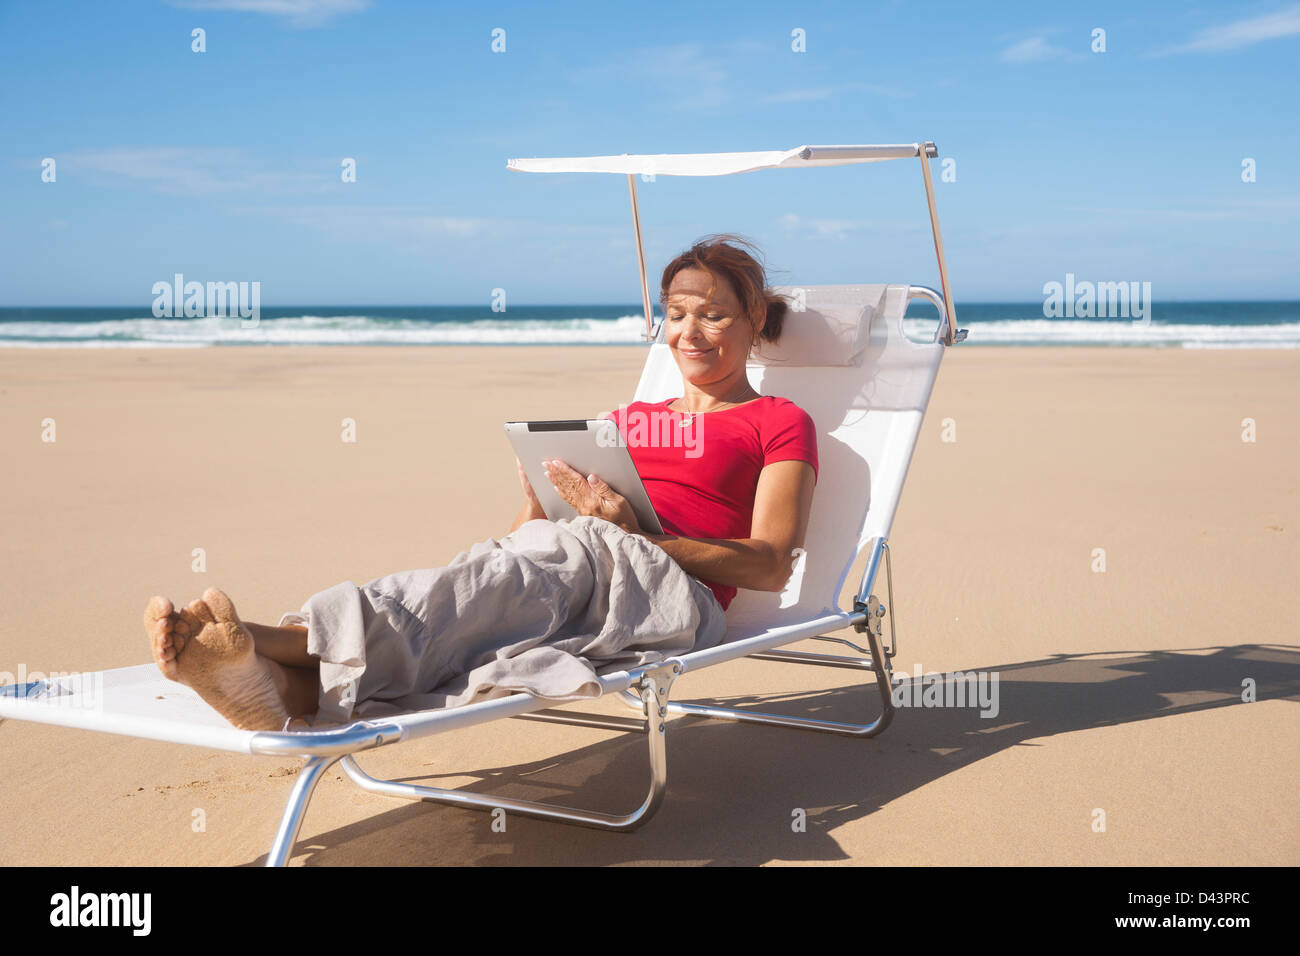 Woman Using Tablet at the Beach, Camaret-sur-Mer, Crozon Peninsula, Finistere, Brittany, France Stock Photo